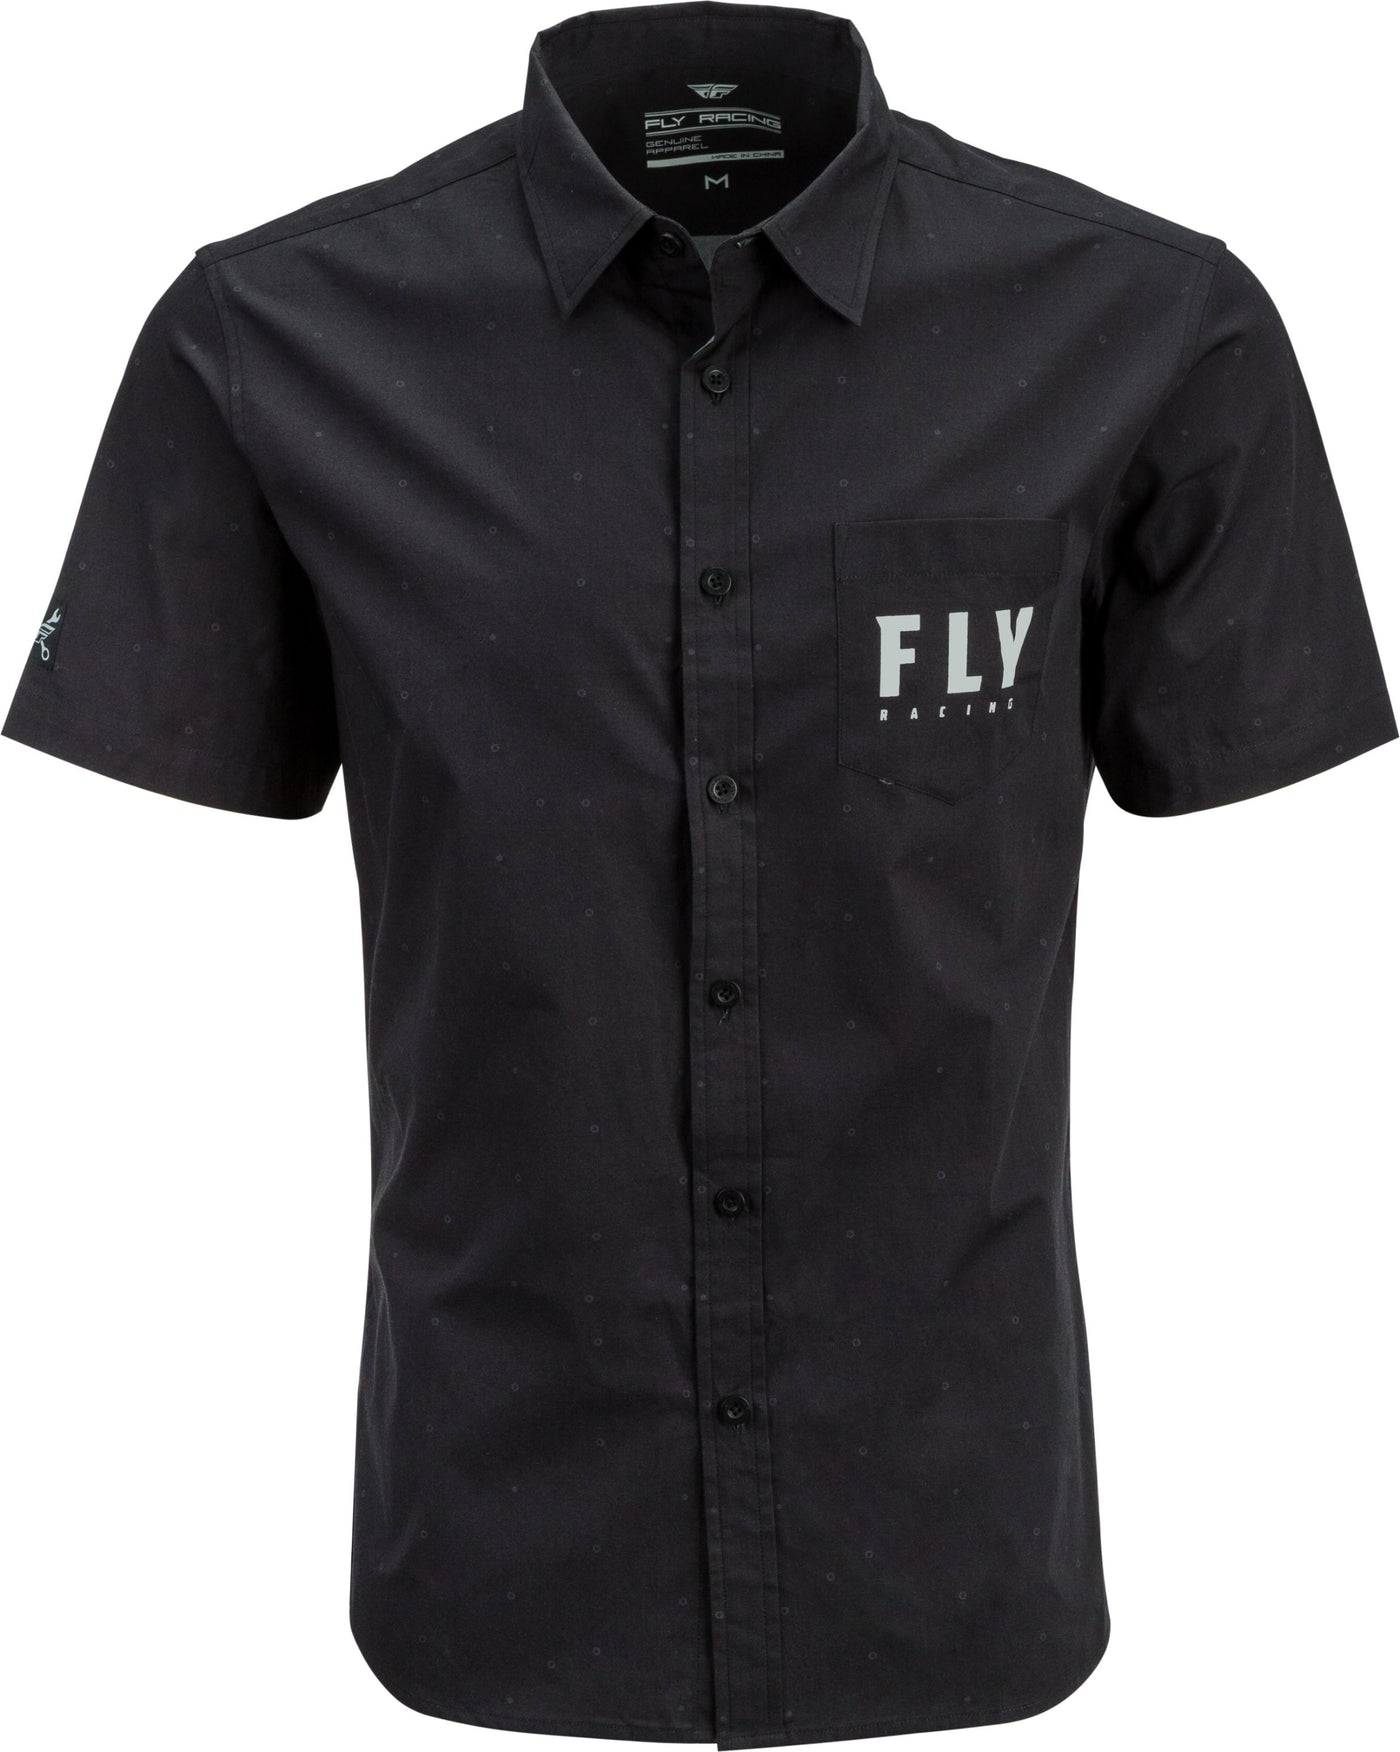 Fly Pit Shirt Red Xl